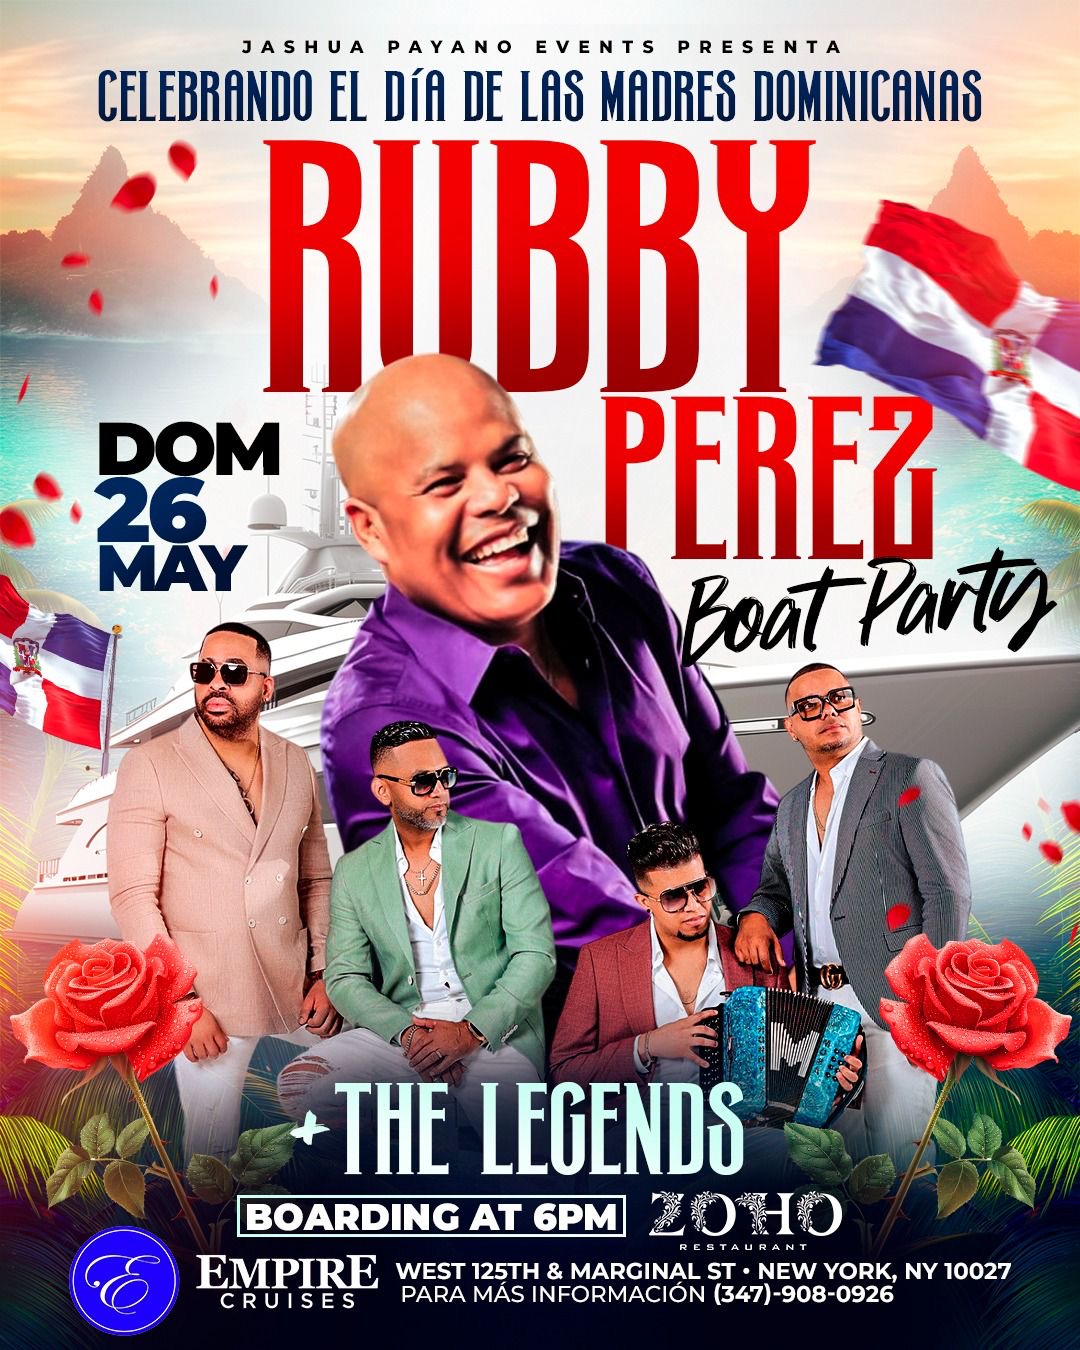 RUBBY PEREZ & THE LEGENDS BOAT PARTY